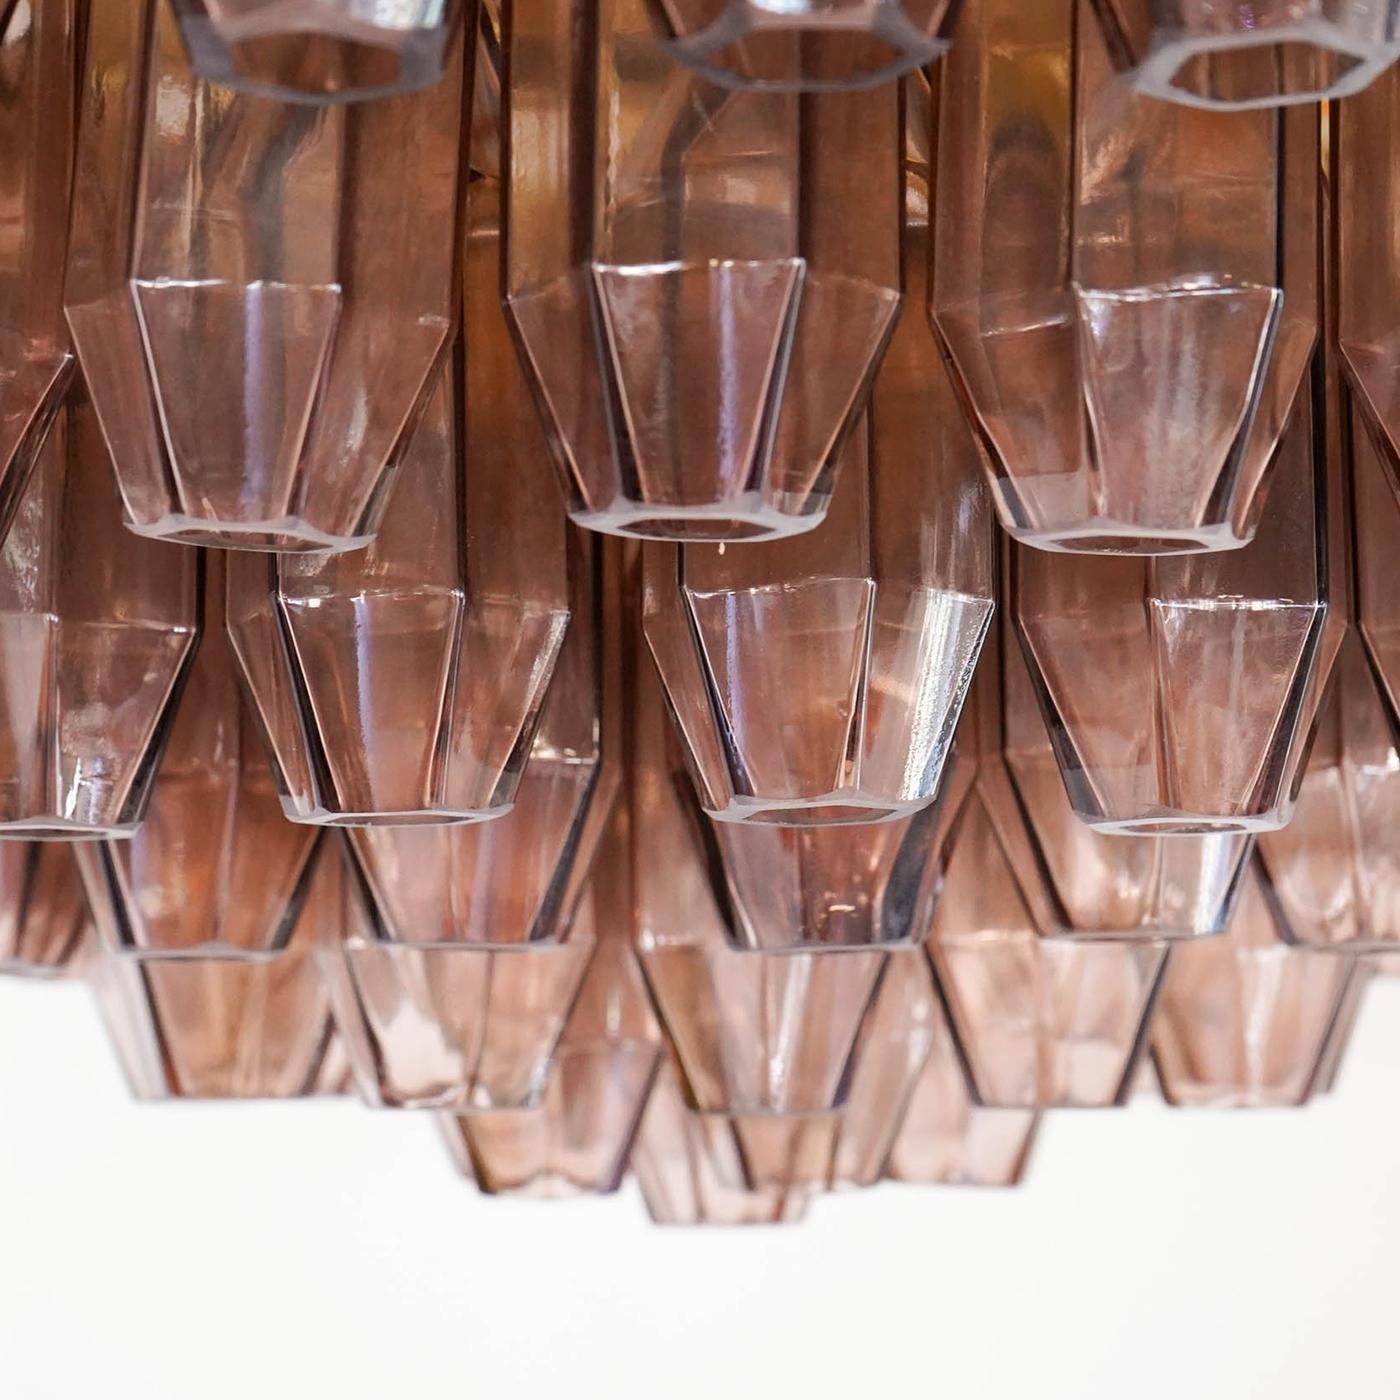 A splendid cluster of 169 mouth-blown amber glass elements shaped like pencils imbues this chandelier with a luxurious charm. Thanks to a special double magnifying lens design, each glass element contributes to the clever concealing of the brass